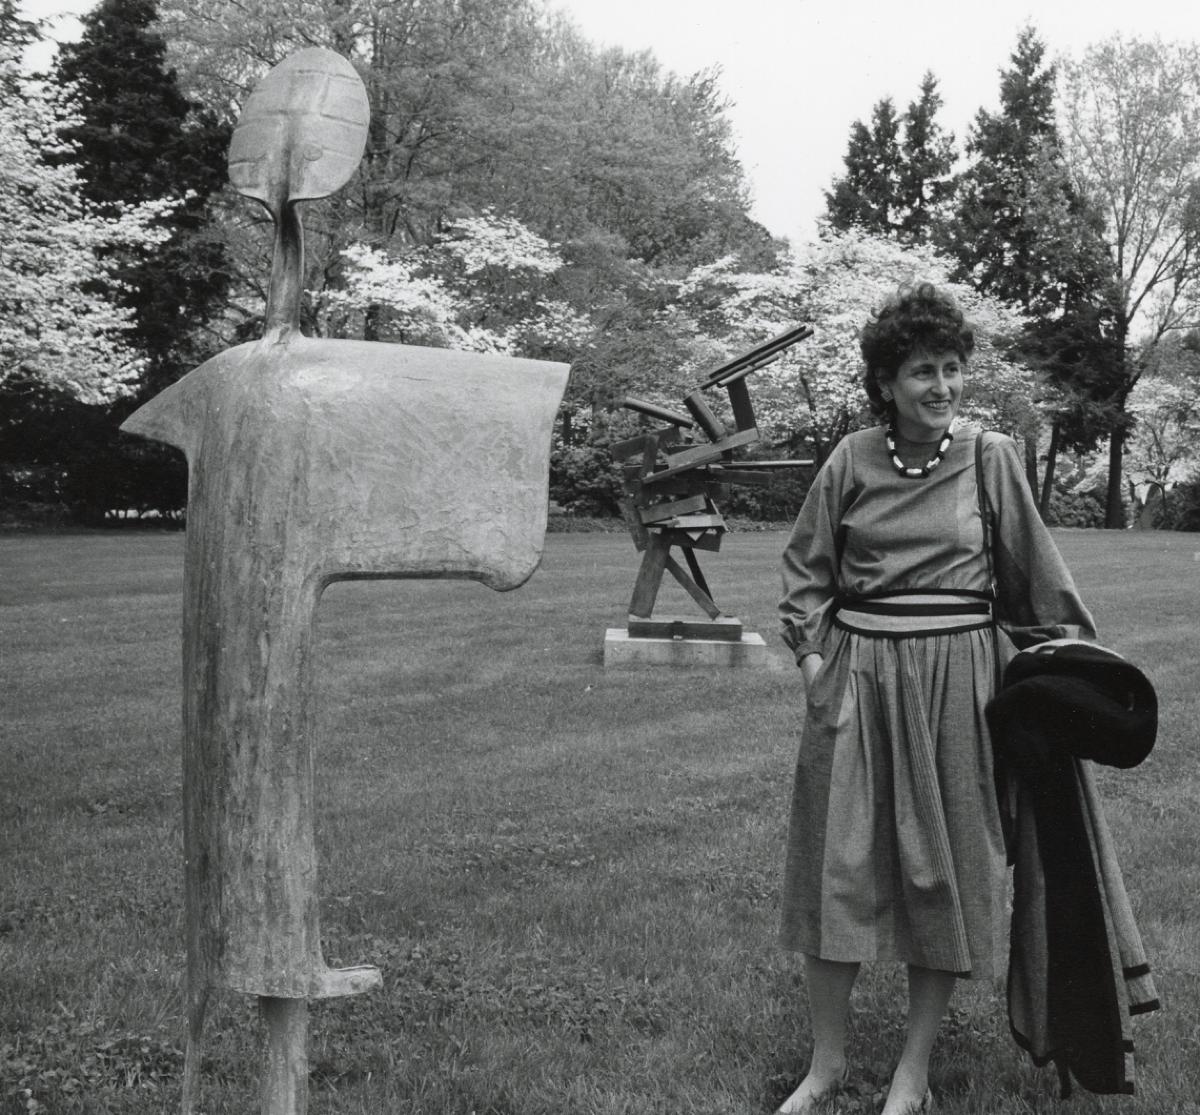 David Smith, <i>Personage of May</i>, 1957<br />
David Smith,&nbsp;<i>Becca</i>, 1964<br />
(installation view with Cynthia Hazen Polsky, <em>29 Sculptures from the Howard and Jean Lipman Collection</em> Opening, Storm King Art Center, 1986)